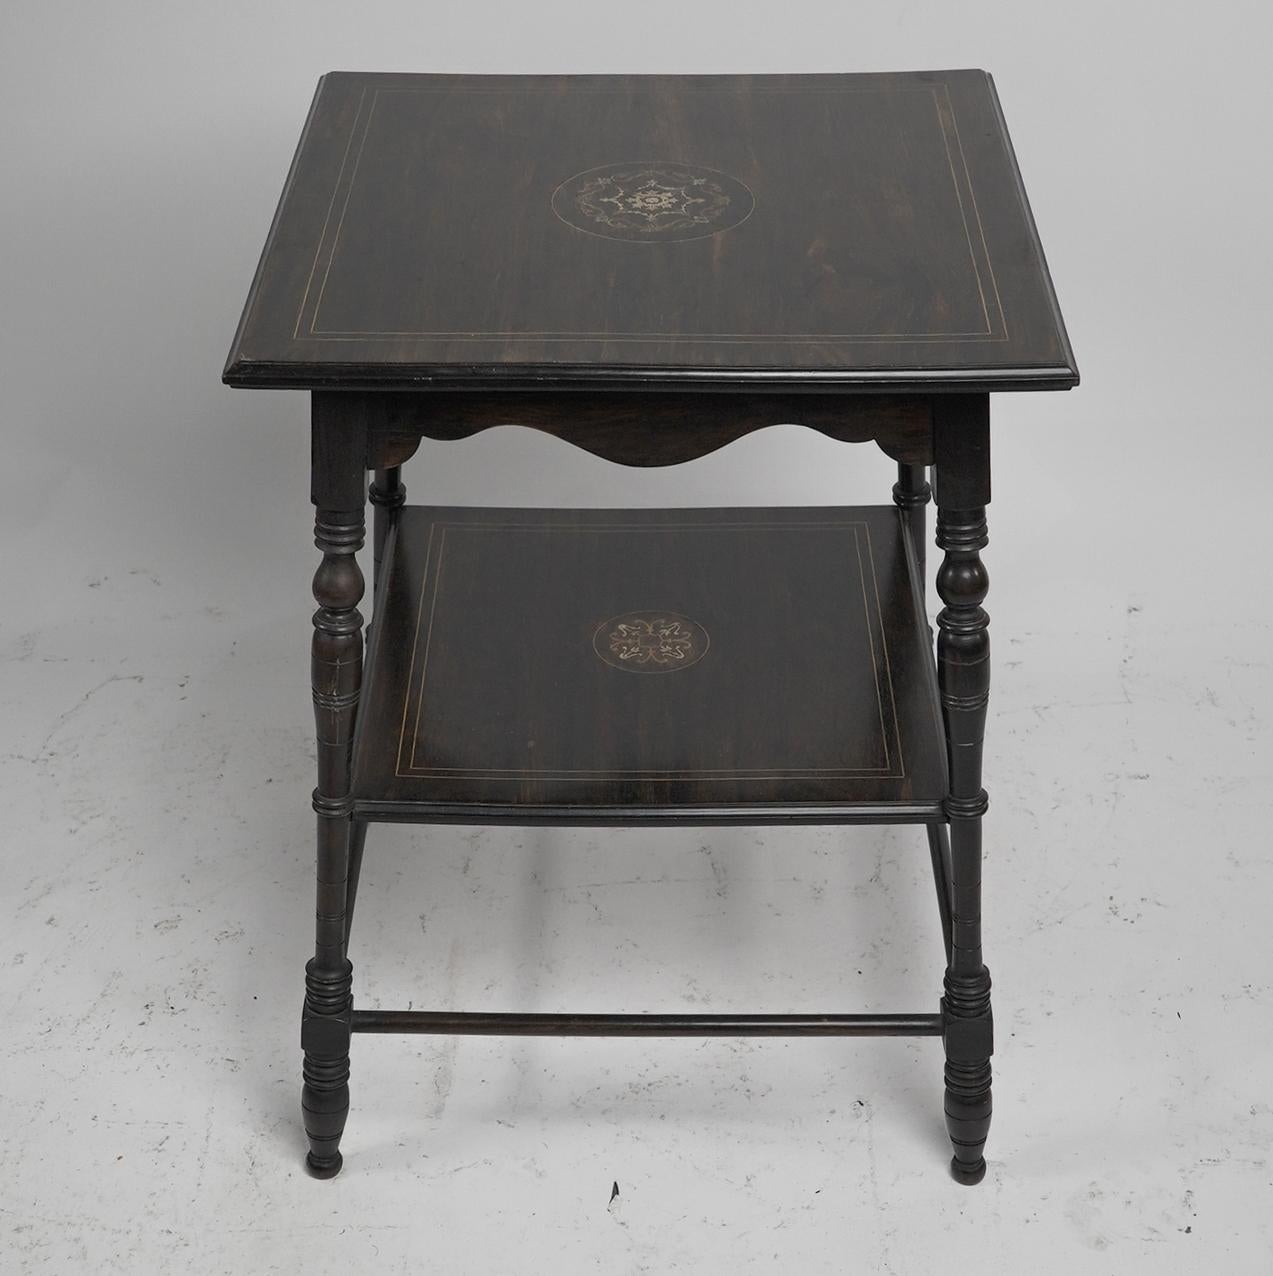 An Aesthetic Movement Rosewood two tier side table inlaid with floral decoration to the centres and parallel line inlay to edges of top and bottom shelf, stood on turned legs united by lower stretchers.